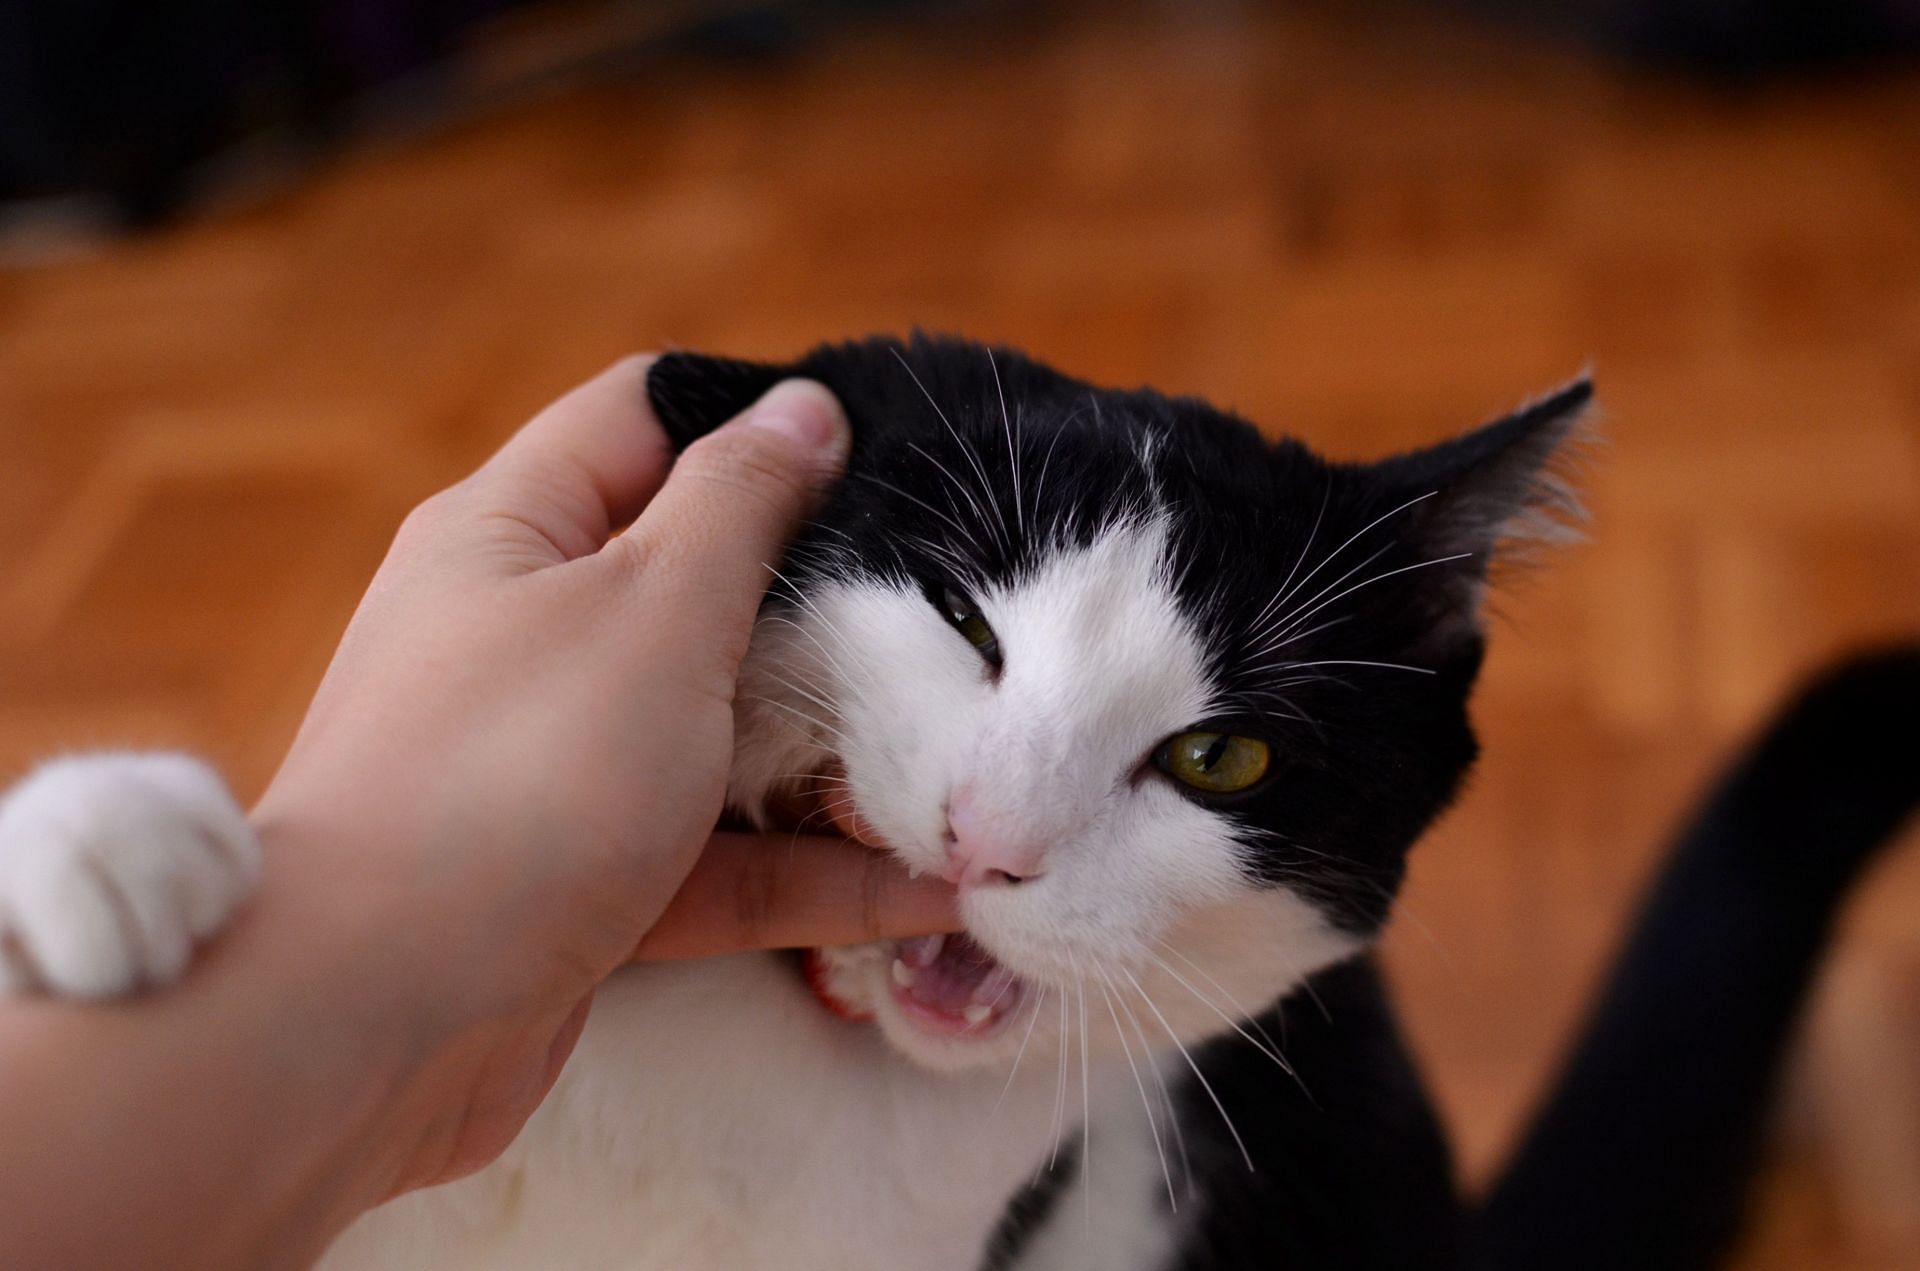 Cat bite caused a newly discovered bacterial infection. (Image via Pexels/ Crina Doltu)